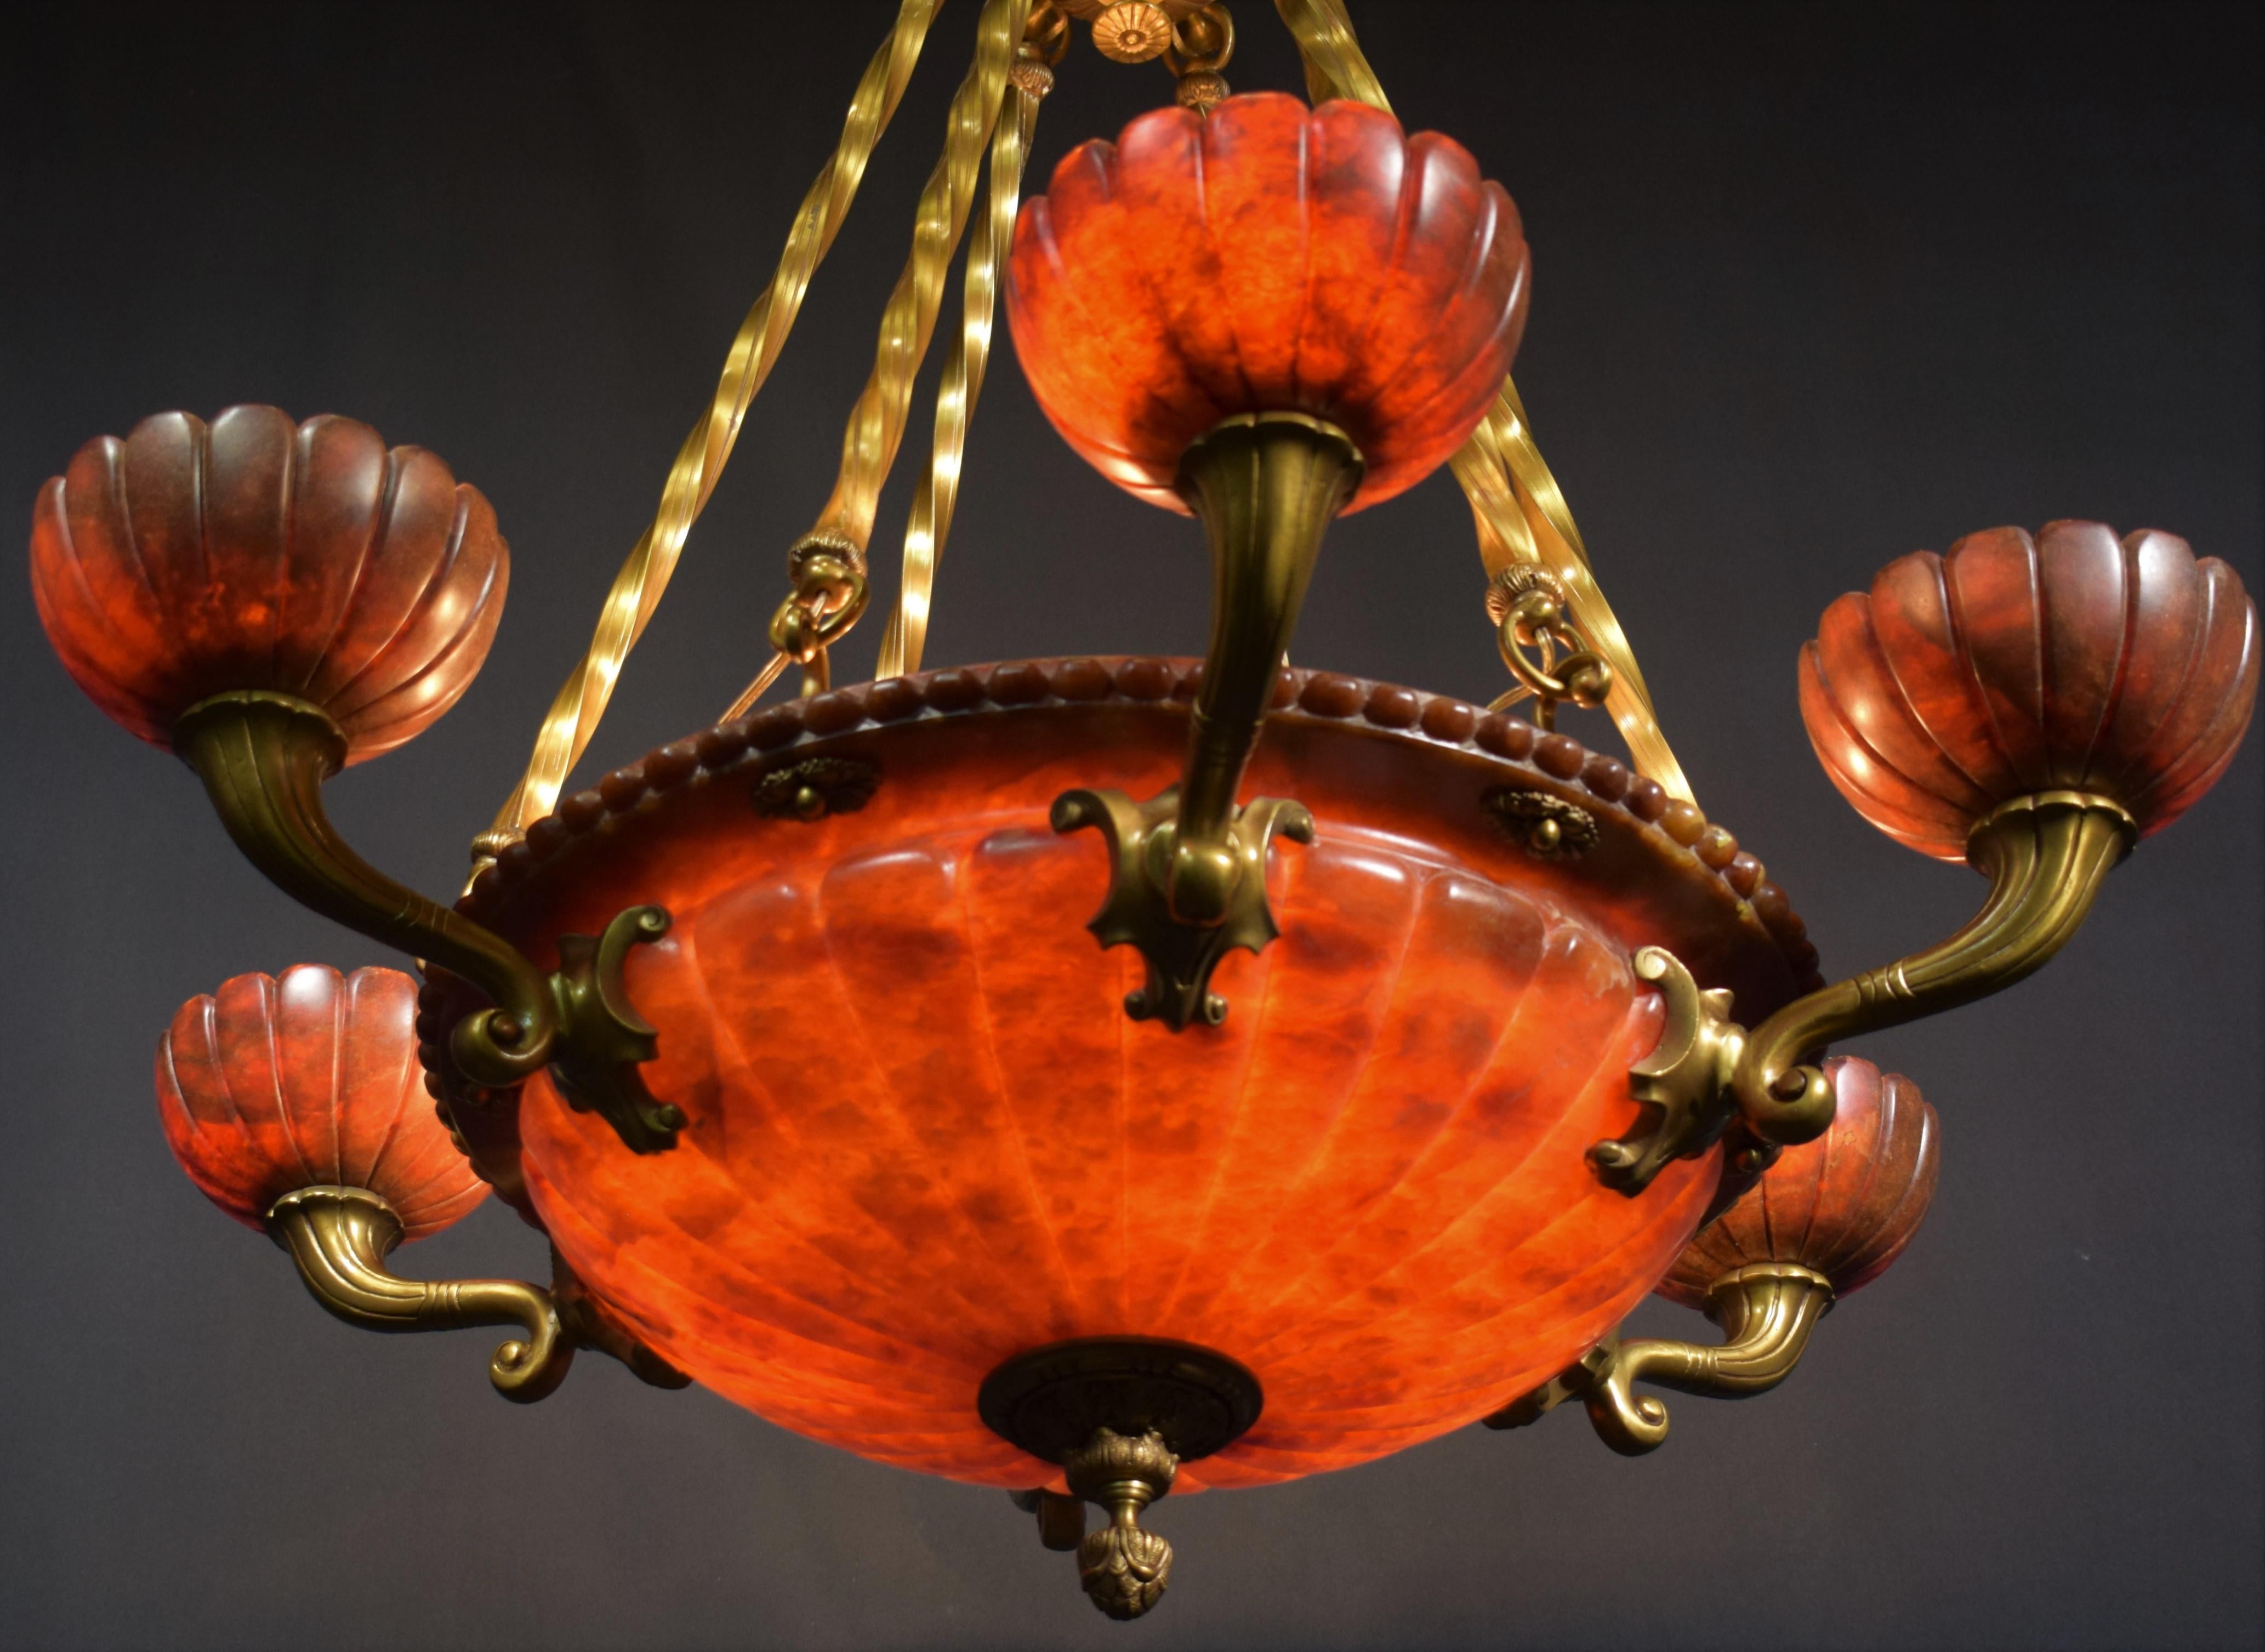 Alabaster chandelier. 9 lights (6 outside & 3 inside dome). 
France, circa 1920
Dimensions: Height 47